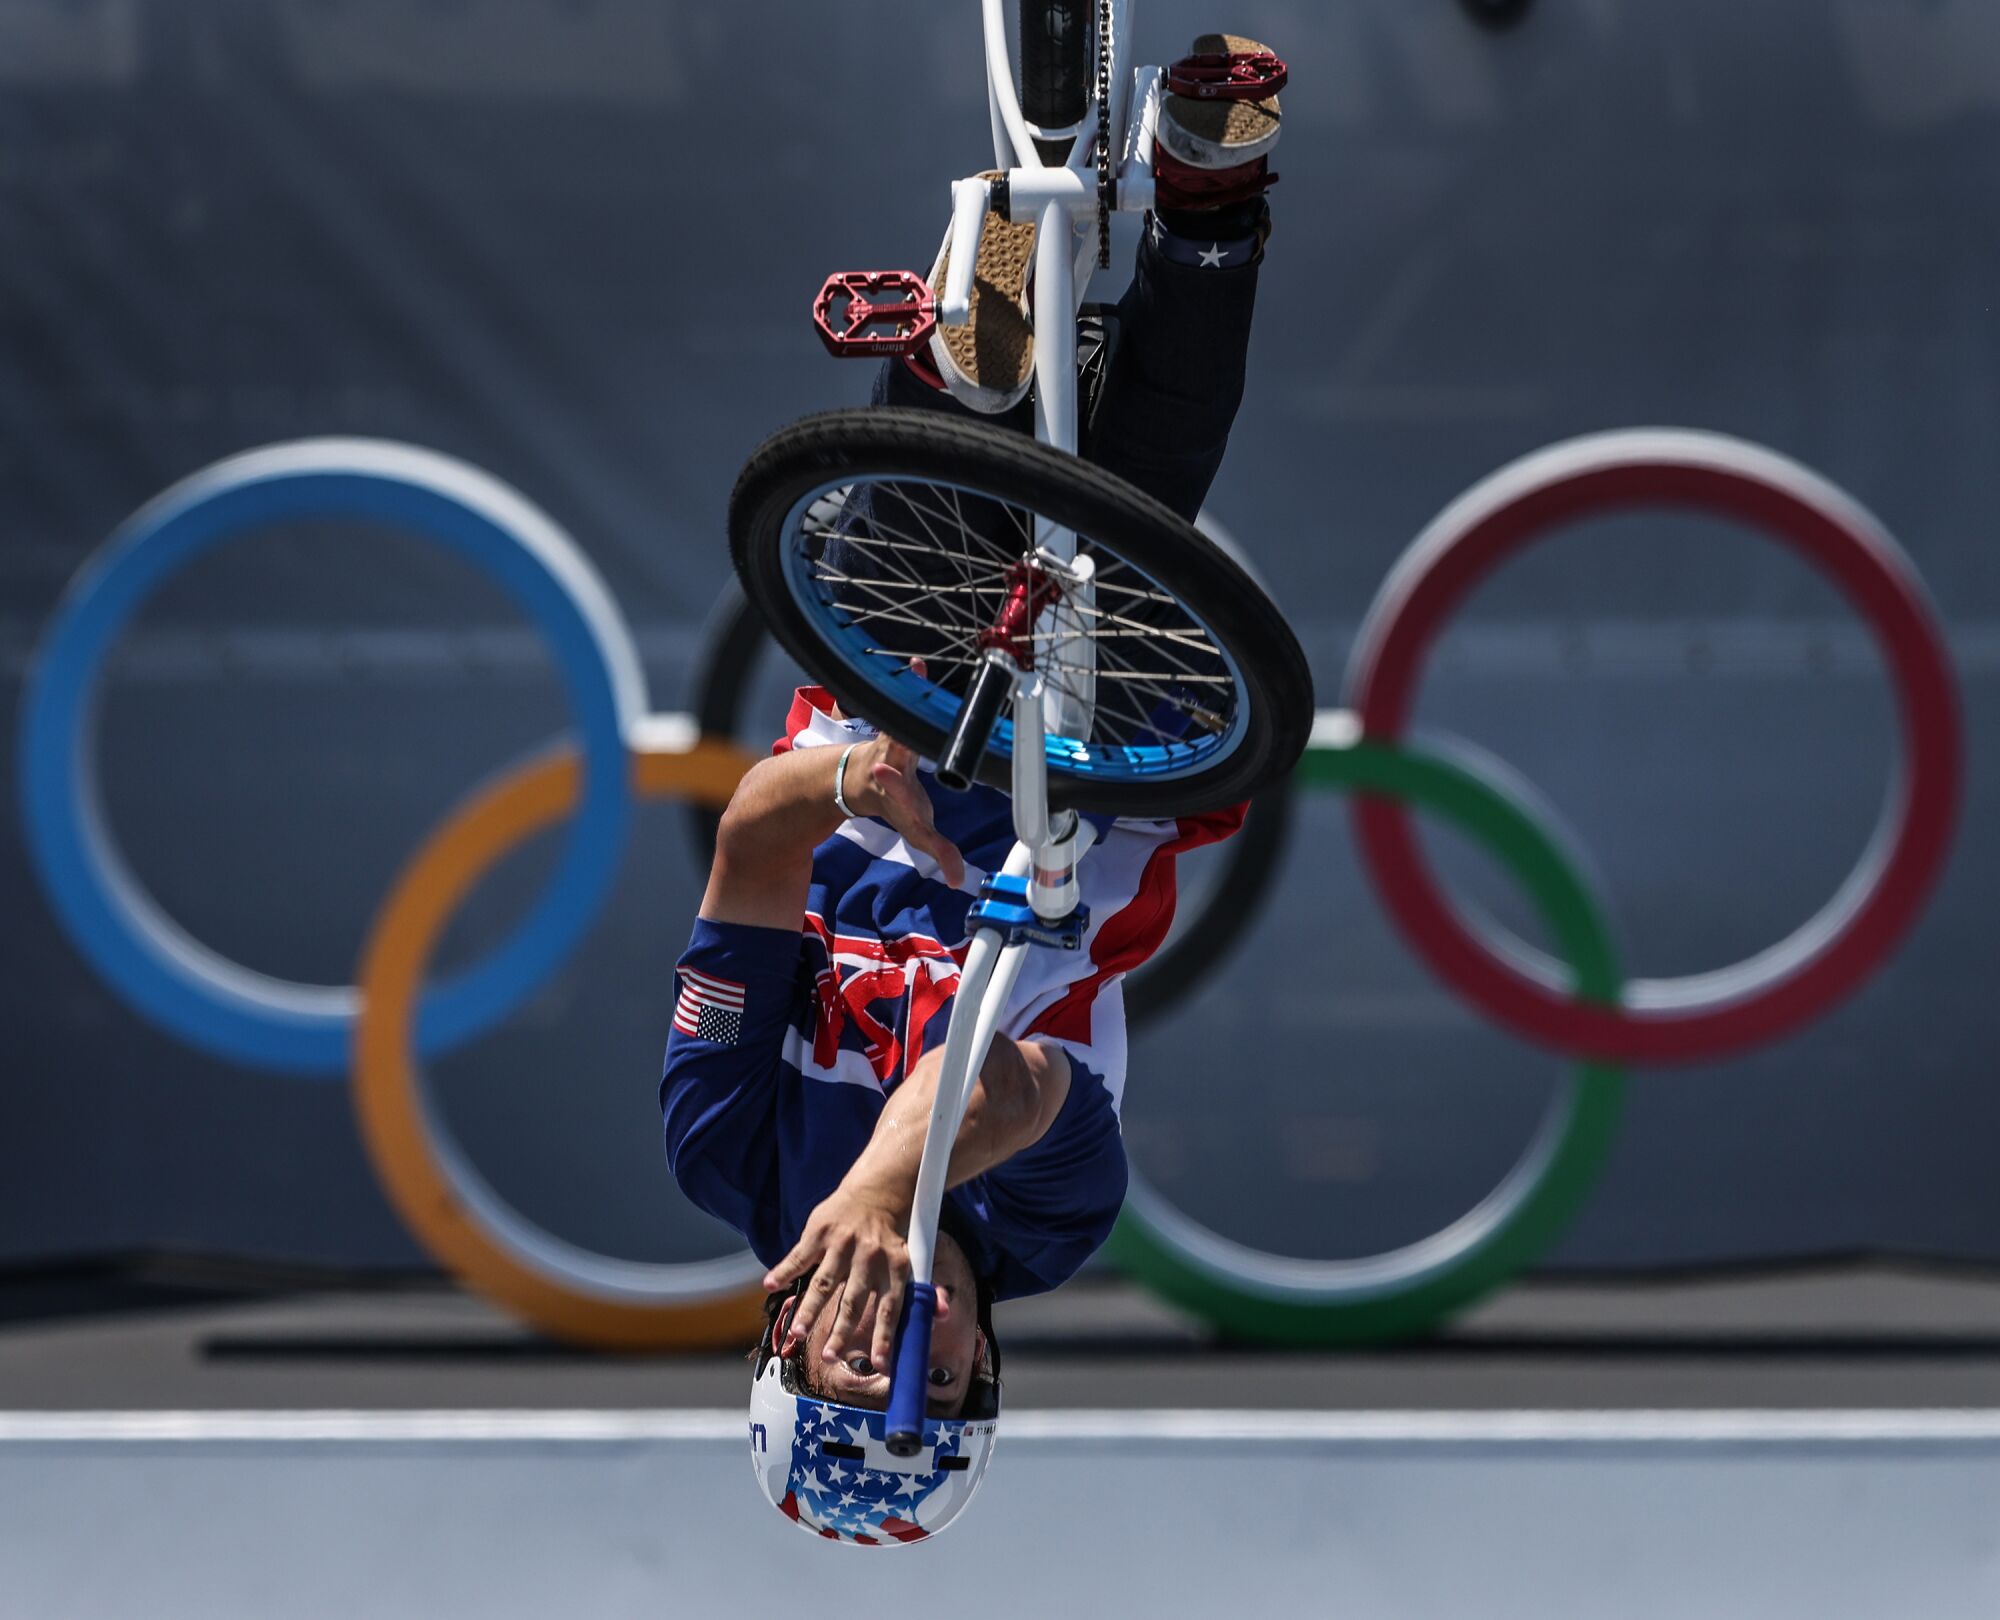 USA's Justin Dowell spins his handlebar as he flips during his first run in the Men's BMX Freestyle Finals.